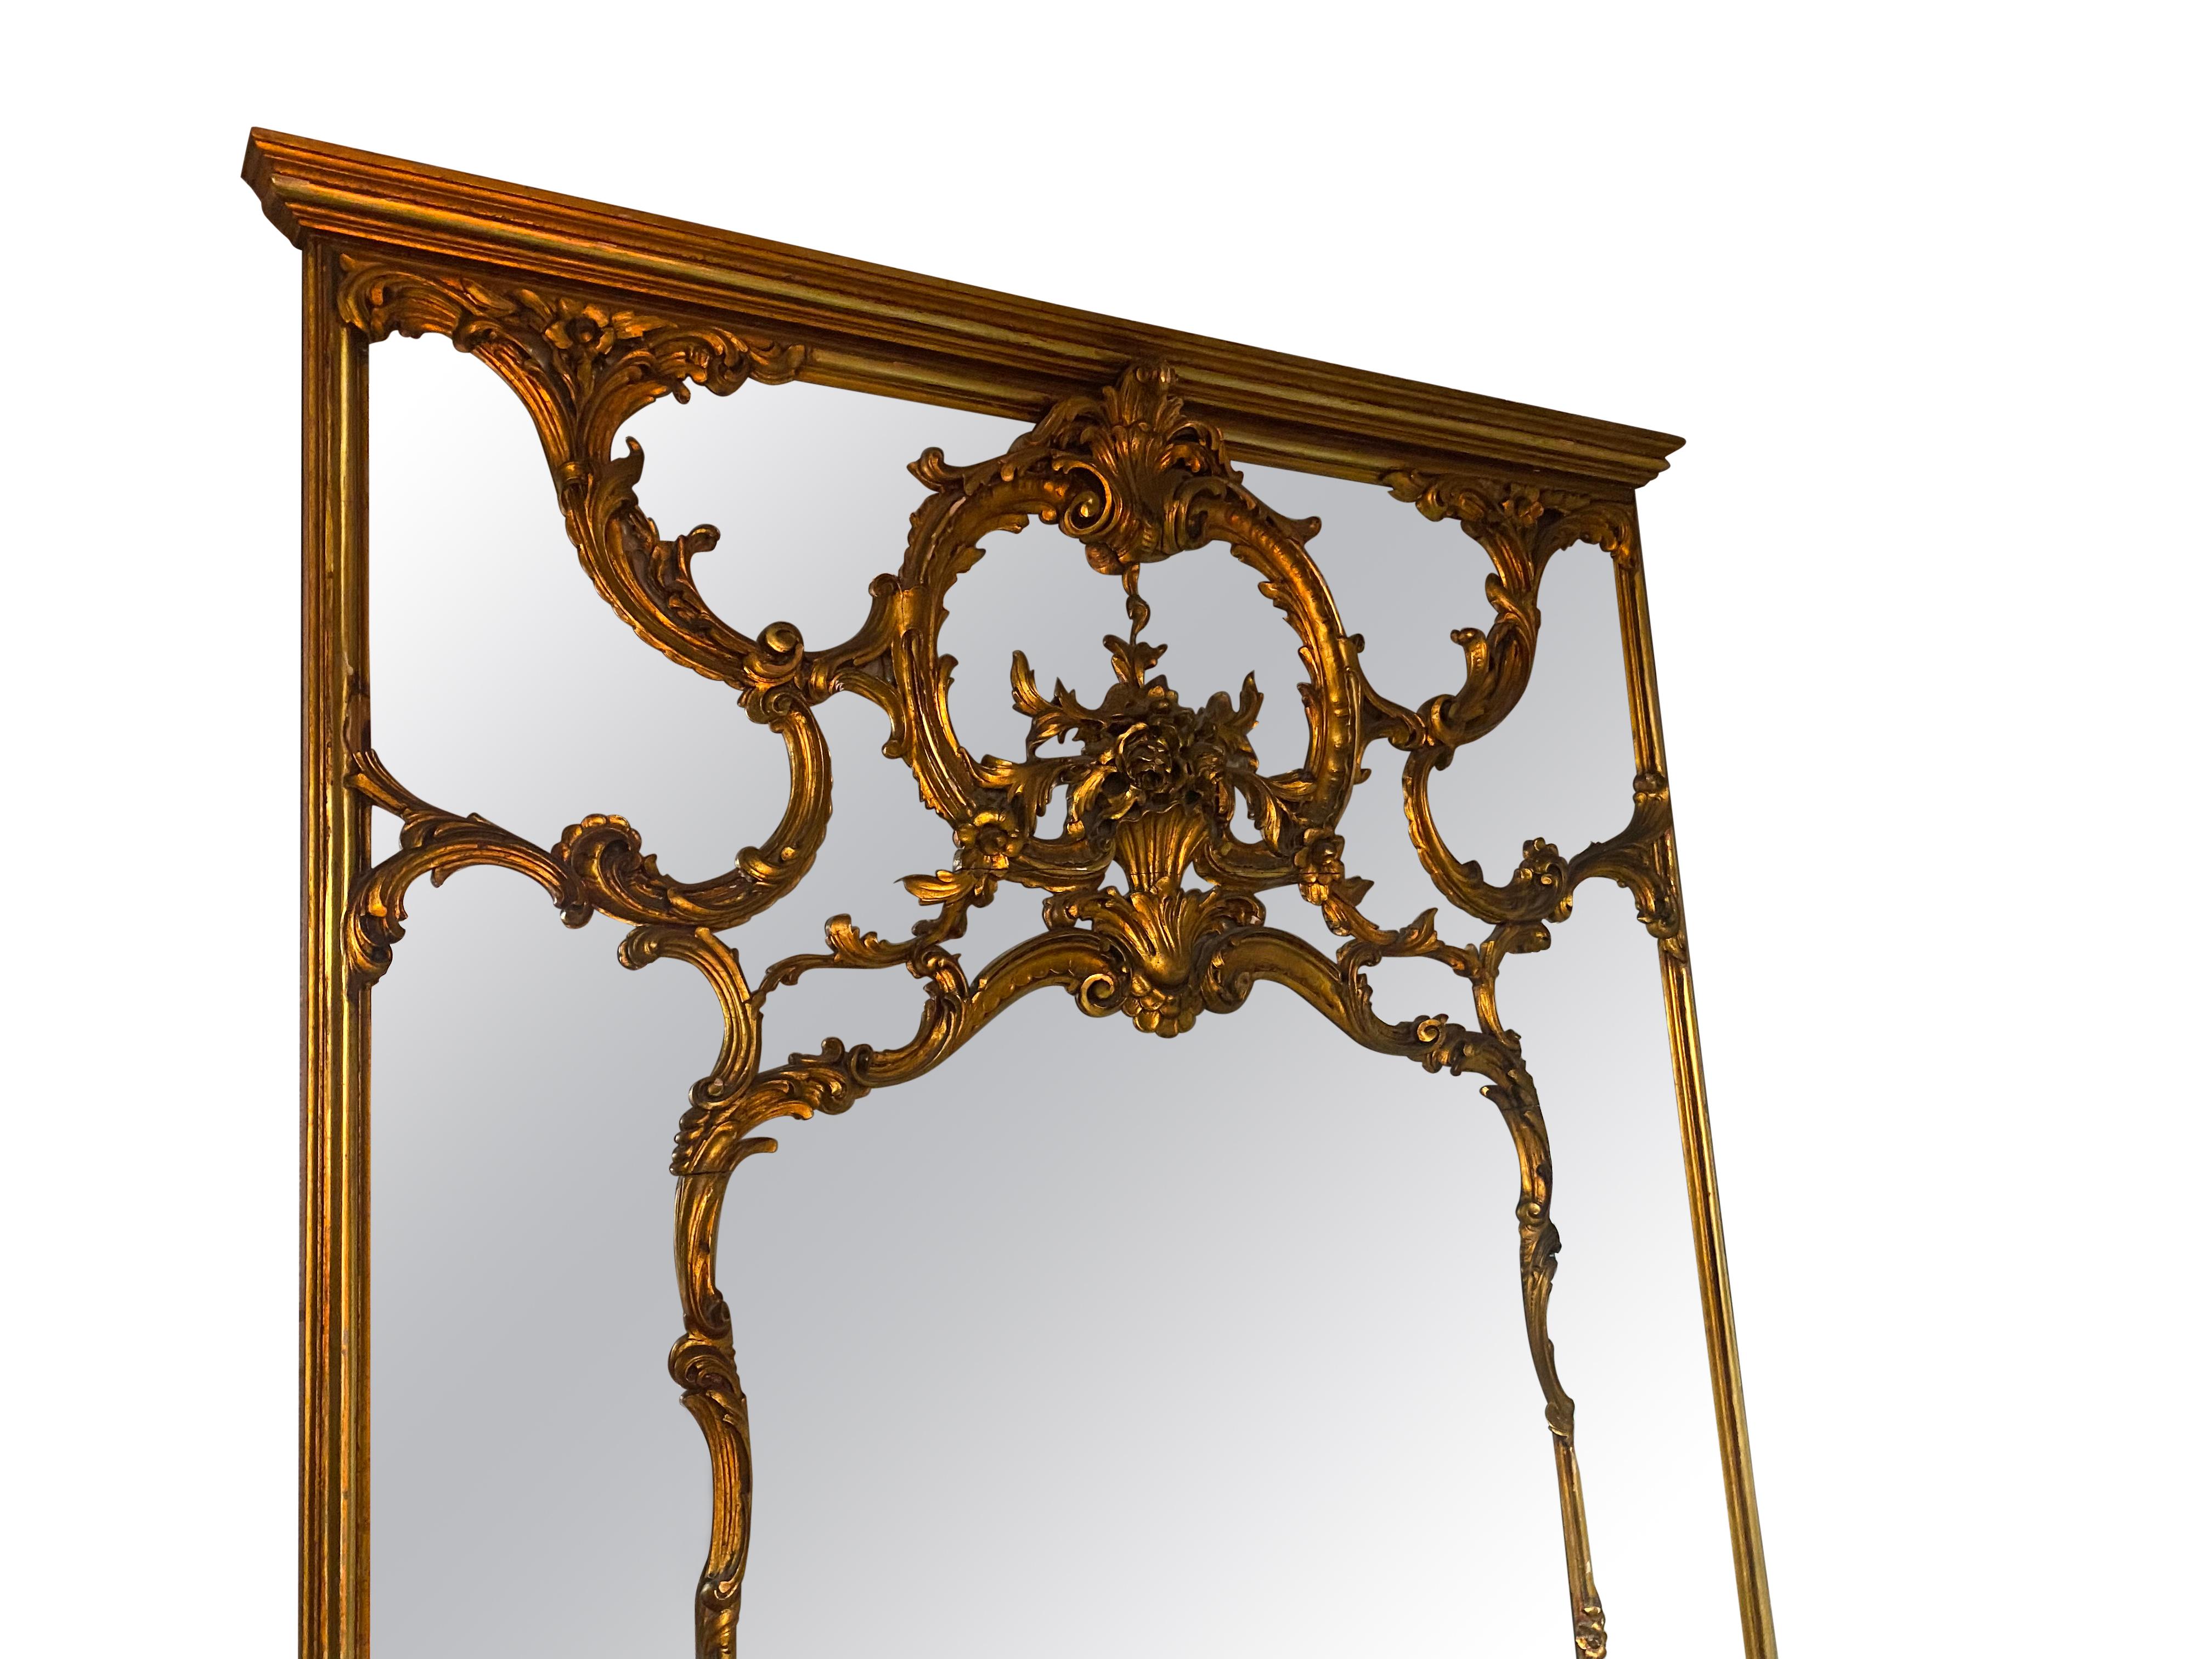 Antique, Decorative, Giltwood, Full Length Mirror  For Sale 1